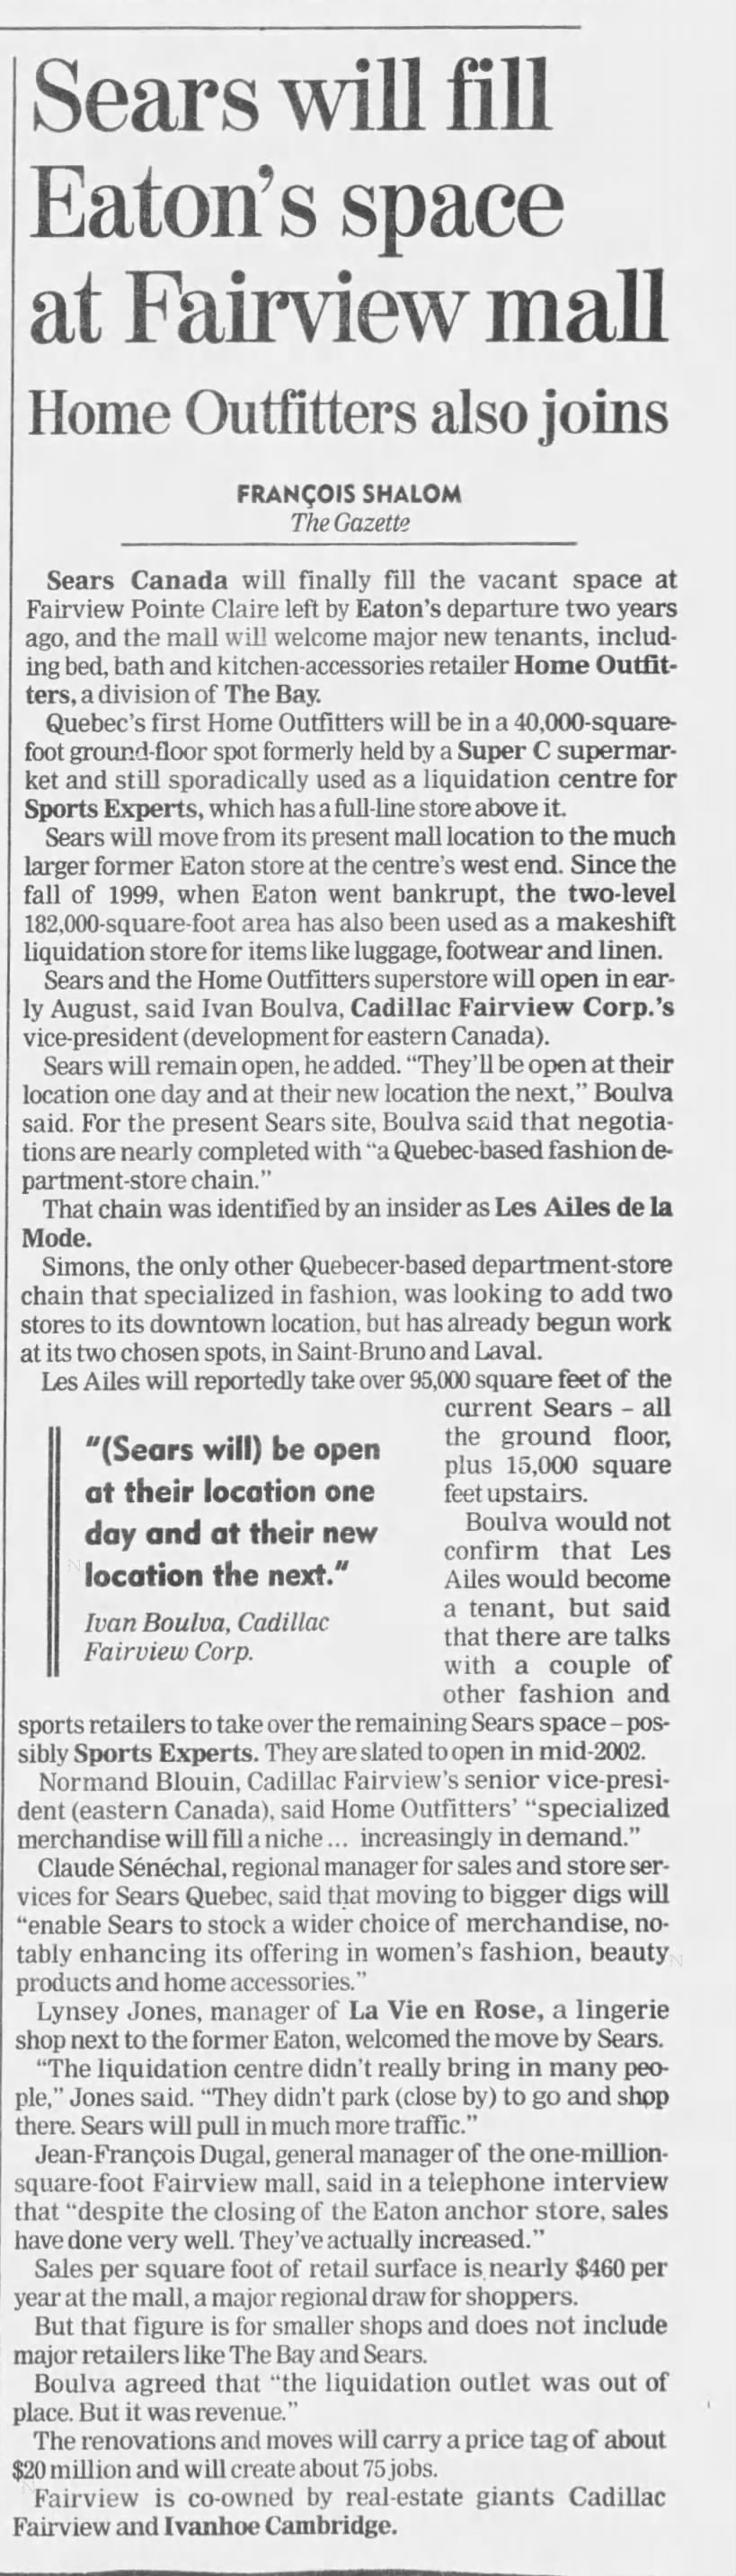 Sears will fill Eaton's space at Fairview mall